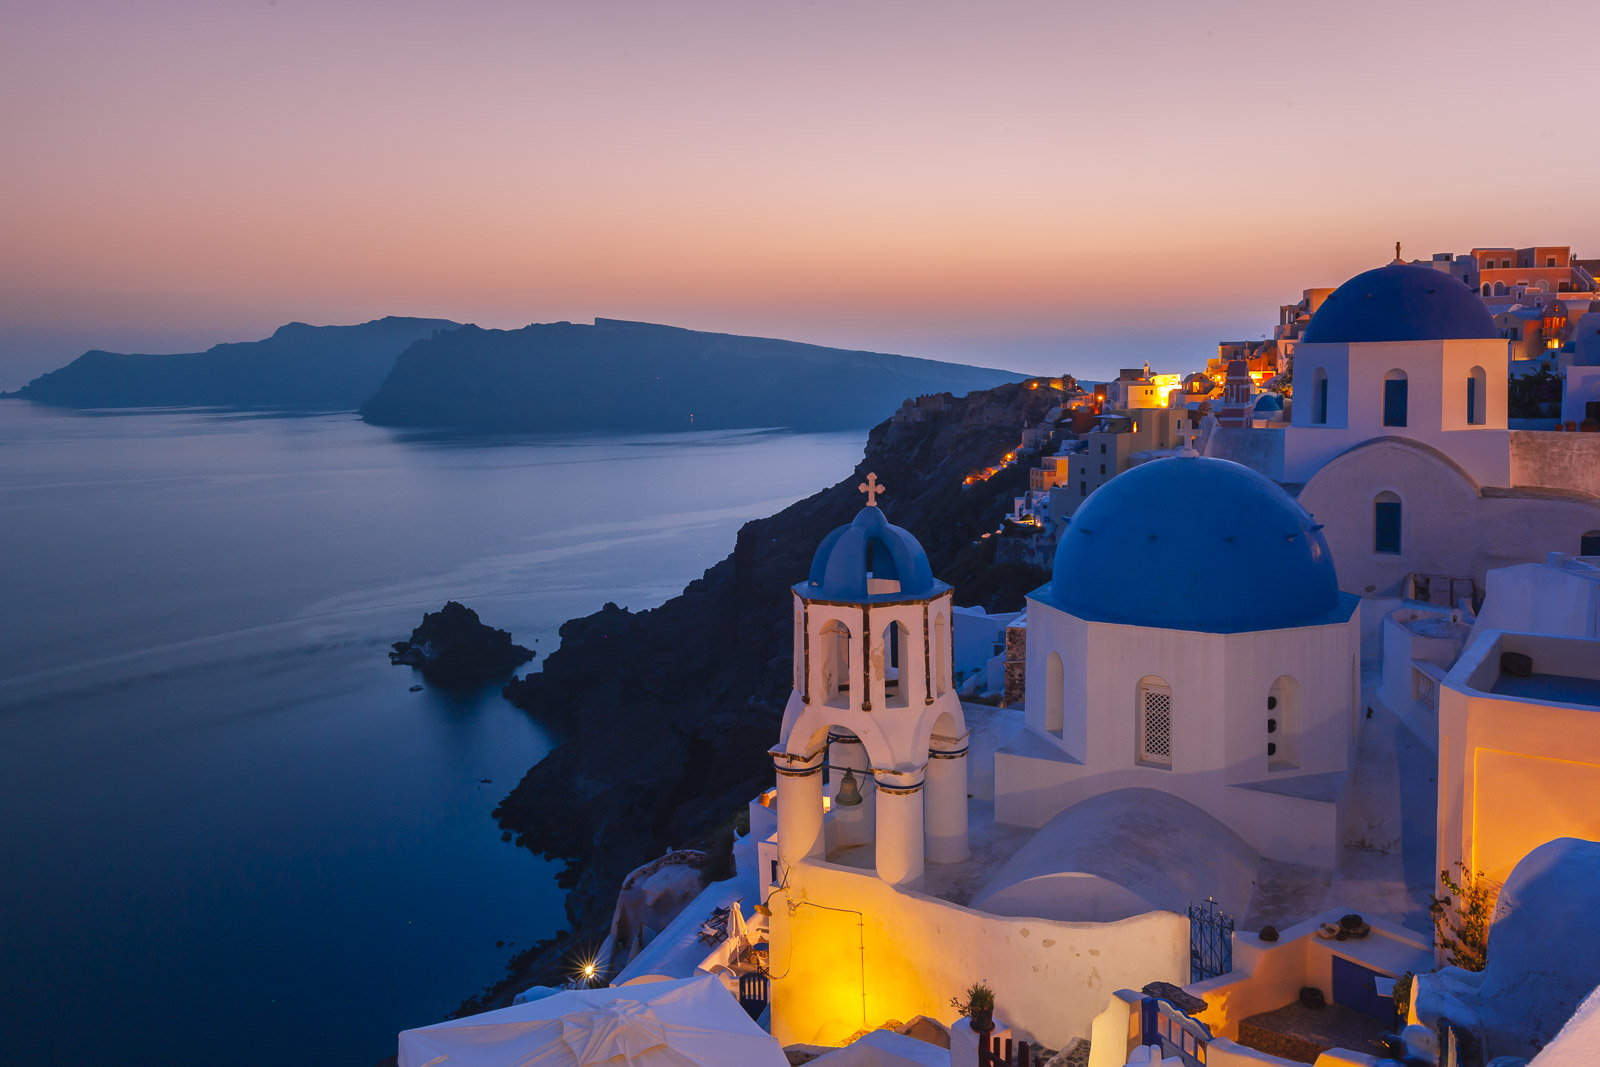 Where to stay in Santorini for nightlife is Fira